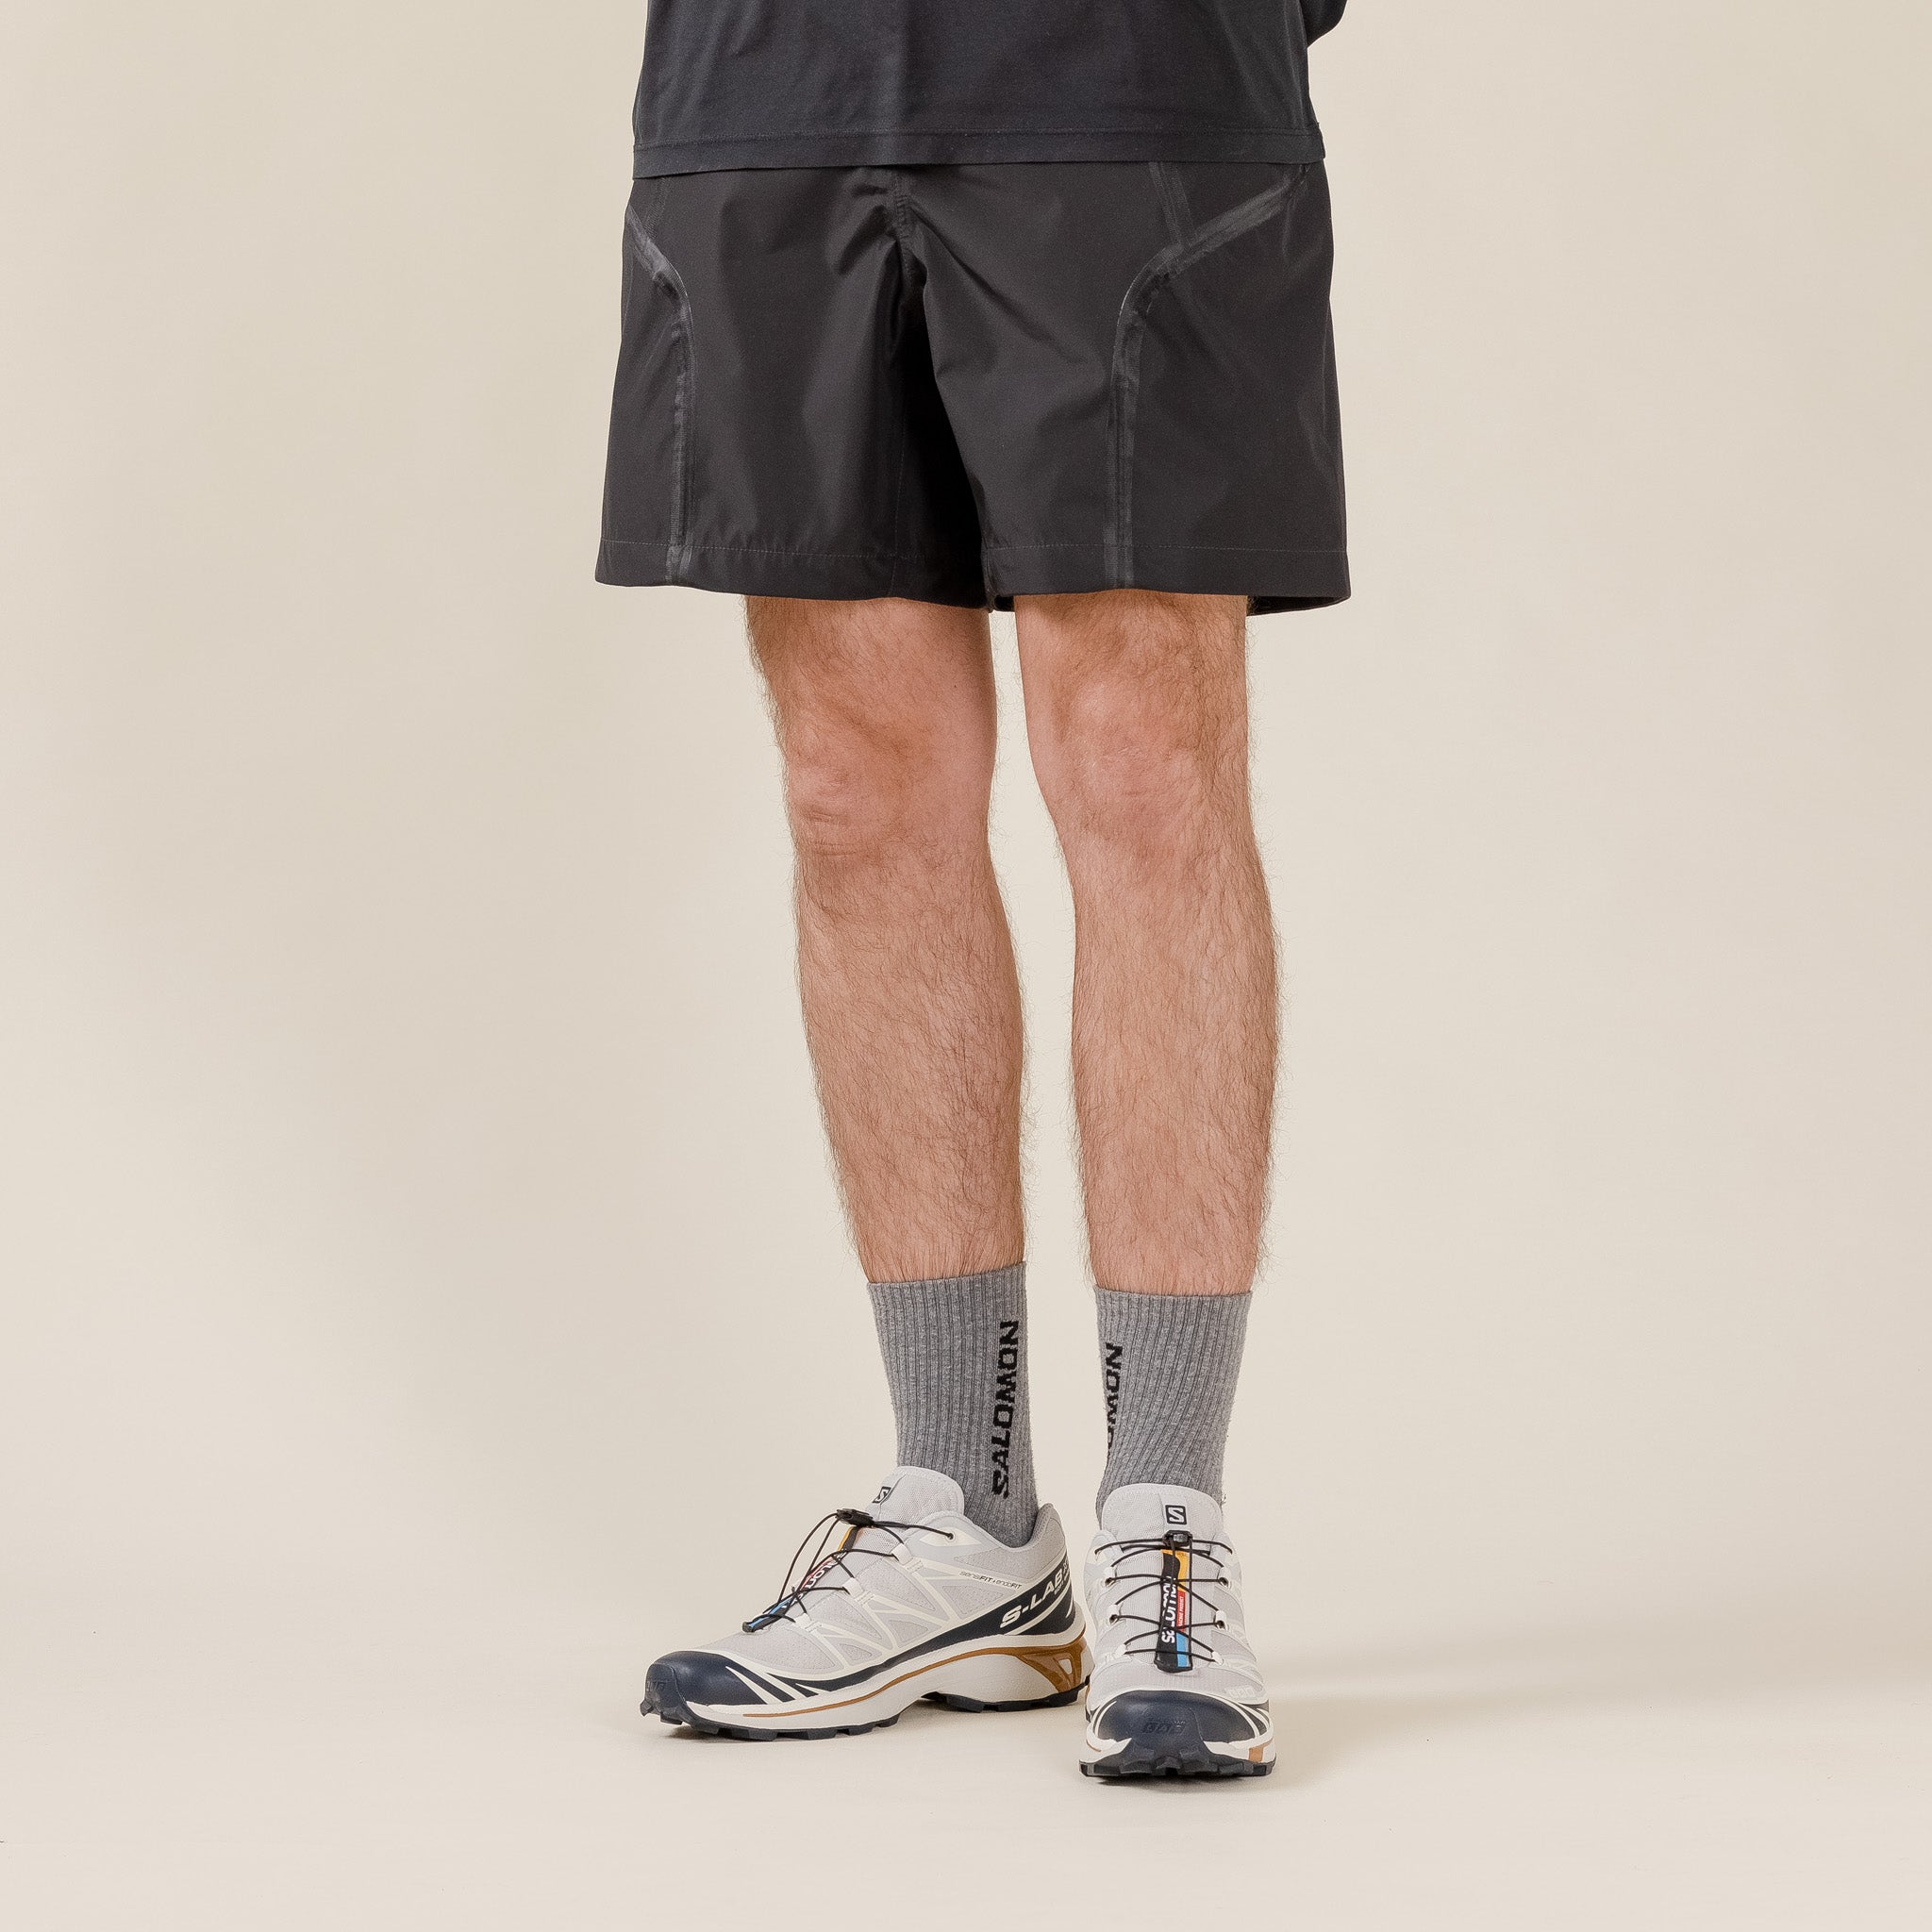 Welter Experiment - WSP003 Seam Sealed 3Layer Shorts - Charcoal Black "welter experiment stockists" "welter experiment uk" "welter experiment korea"